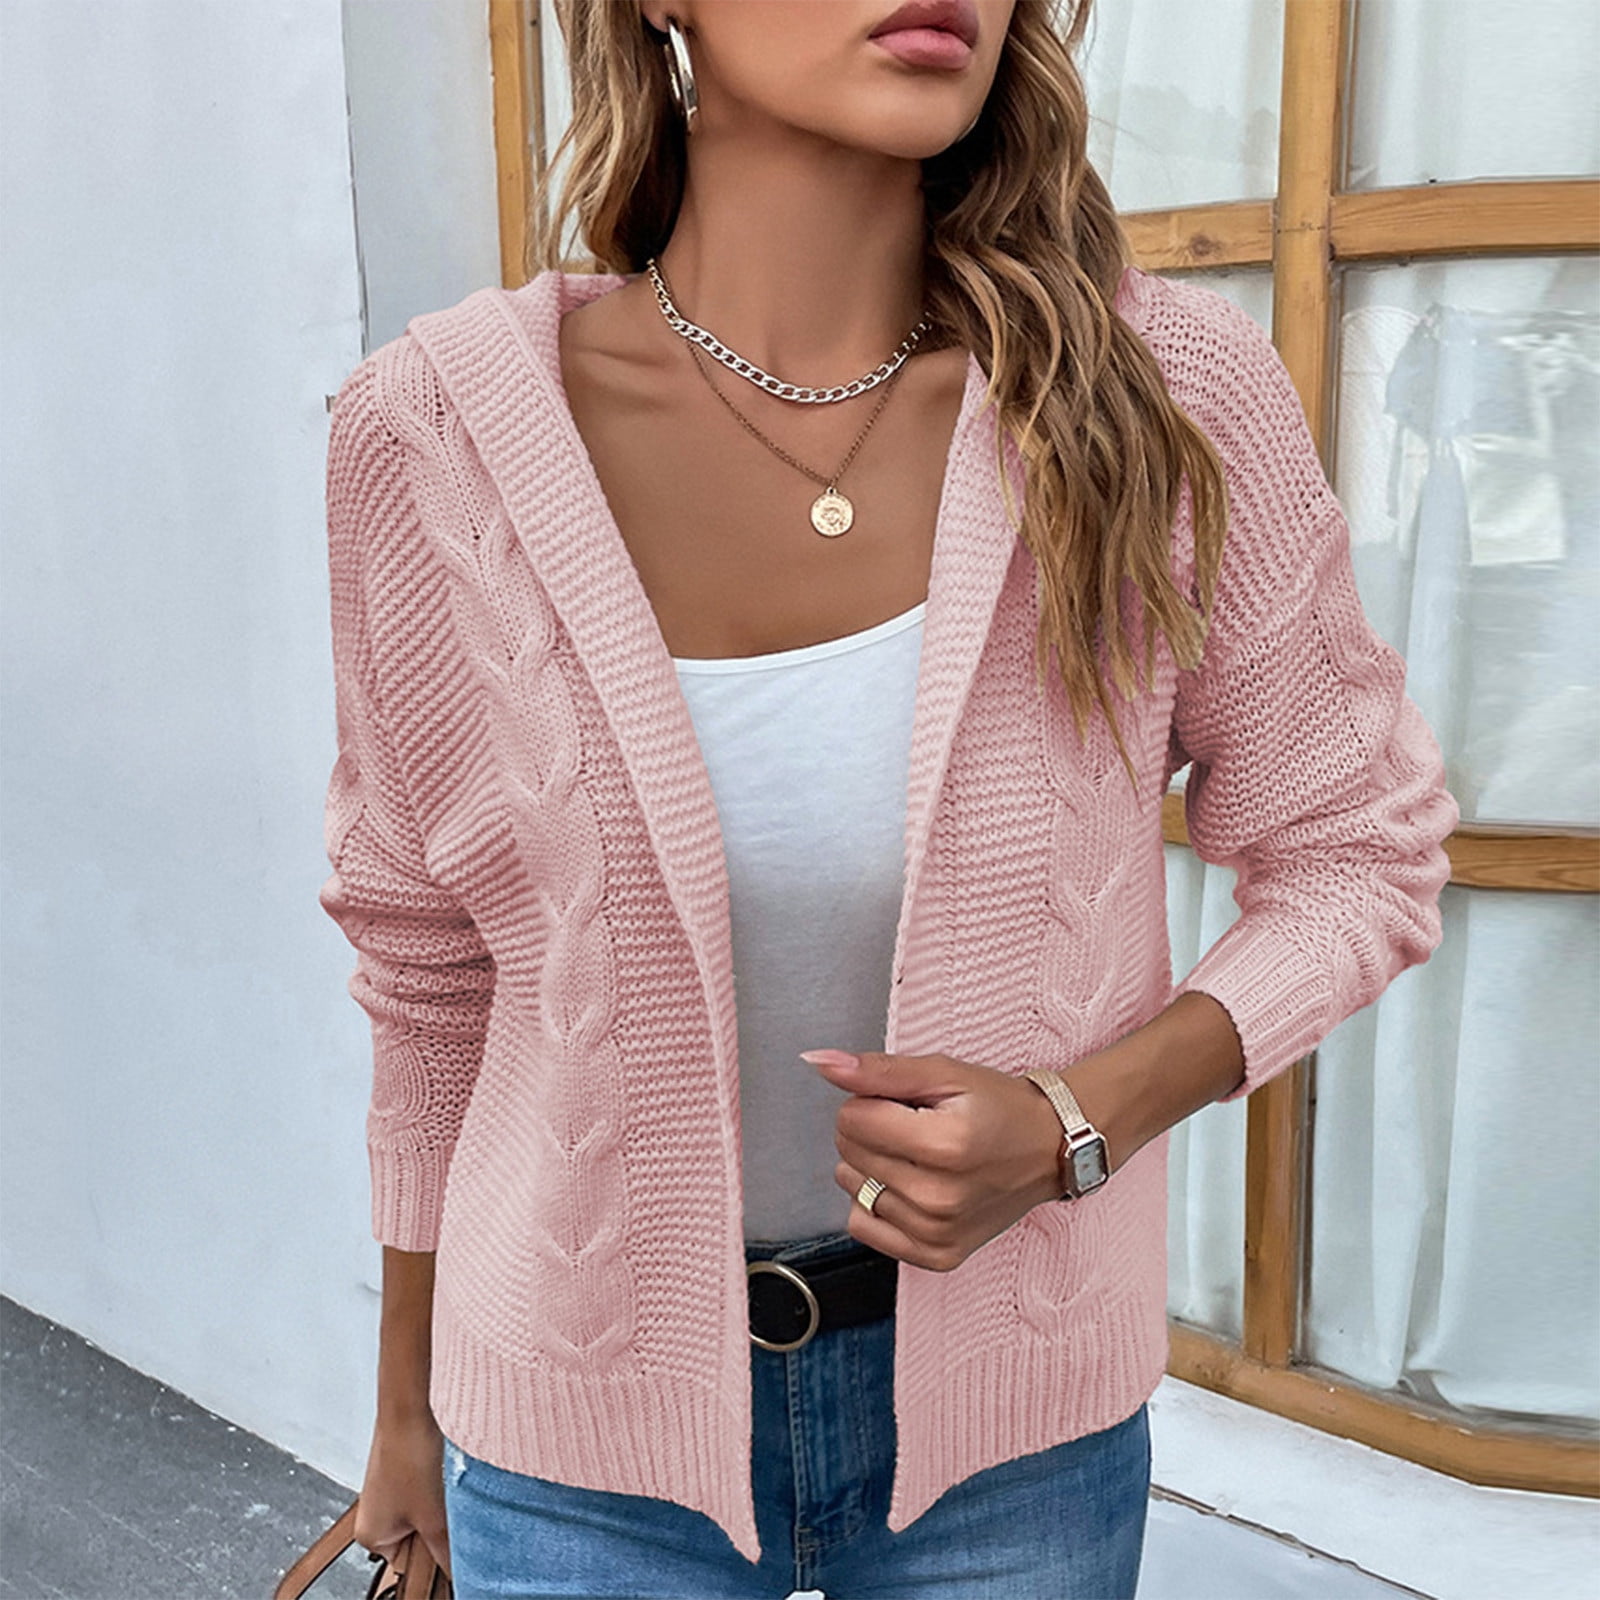 Ladies Casual Fashion Thick Solid Color Knit Cardigan Sweater Jacket -  Walmart.com